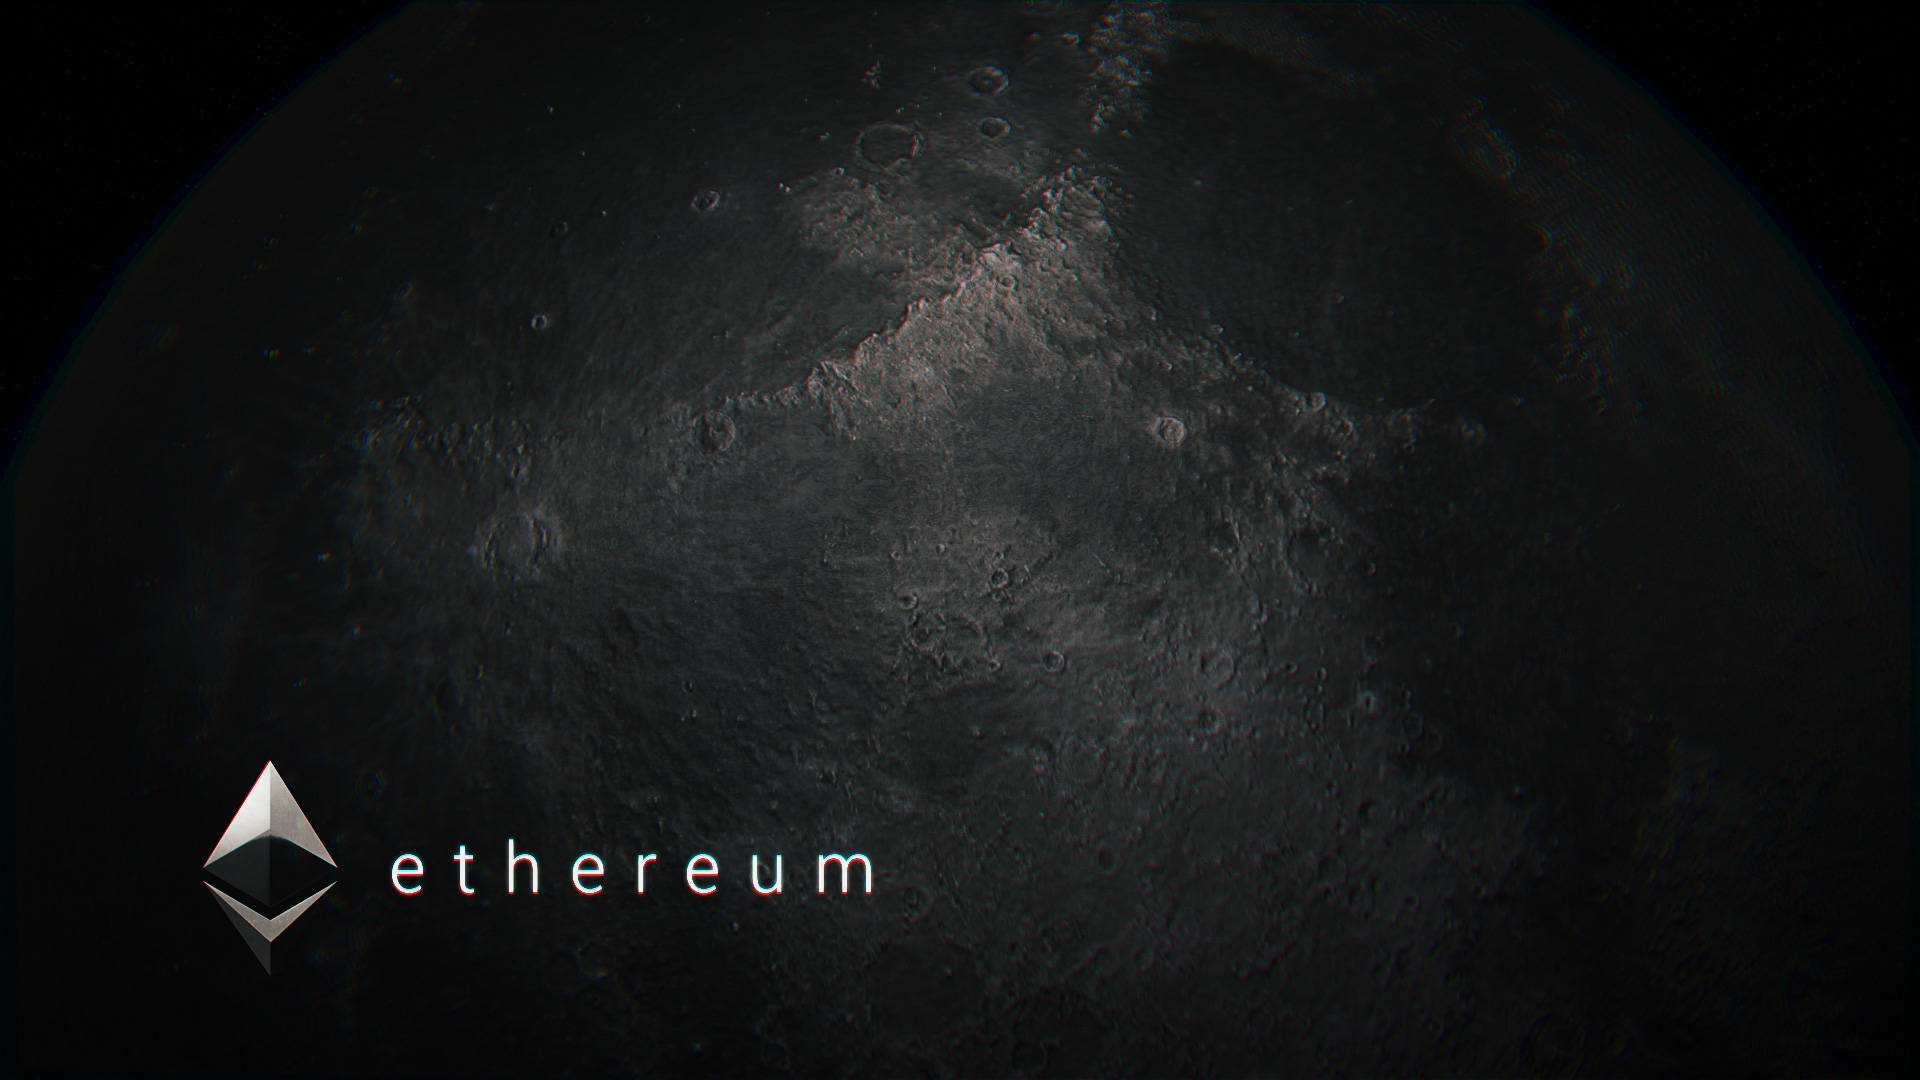 Ethereum And Moon Background